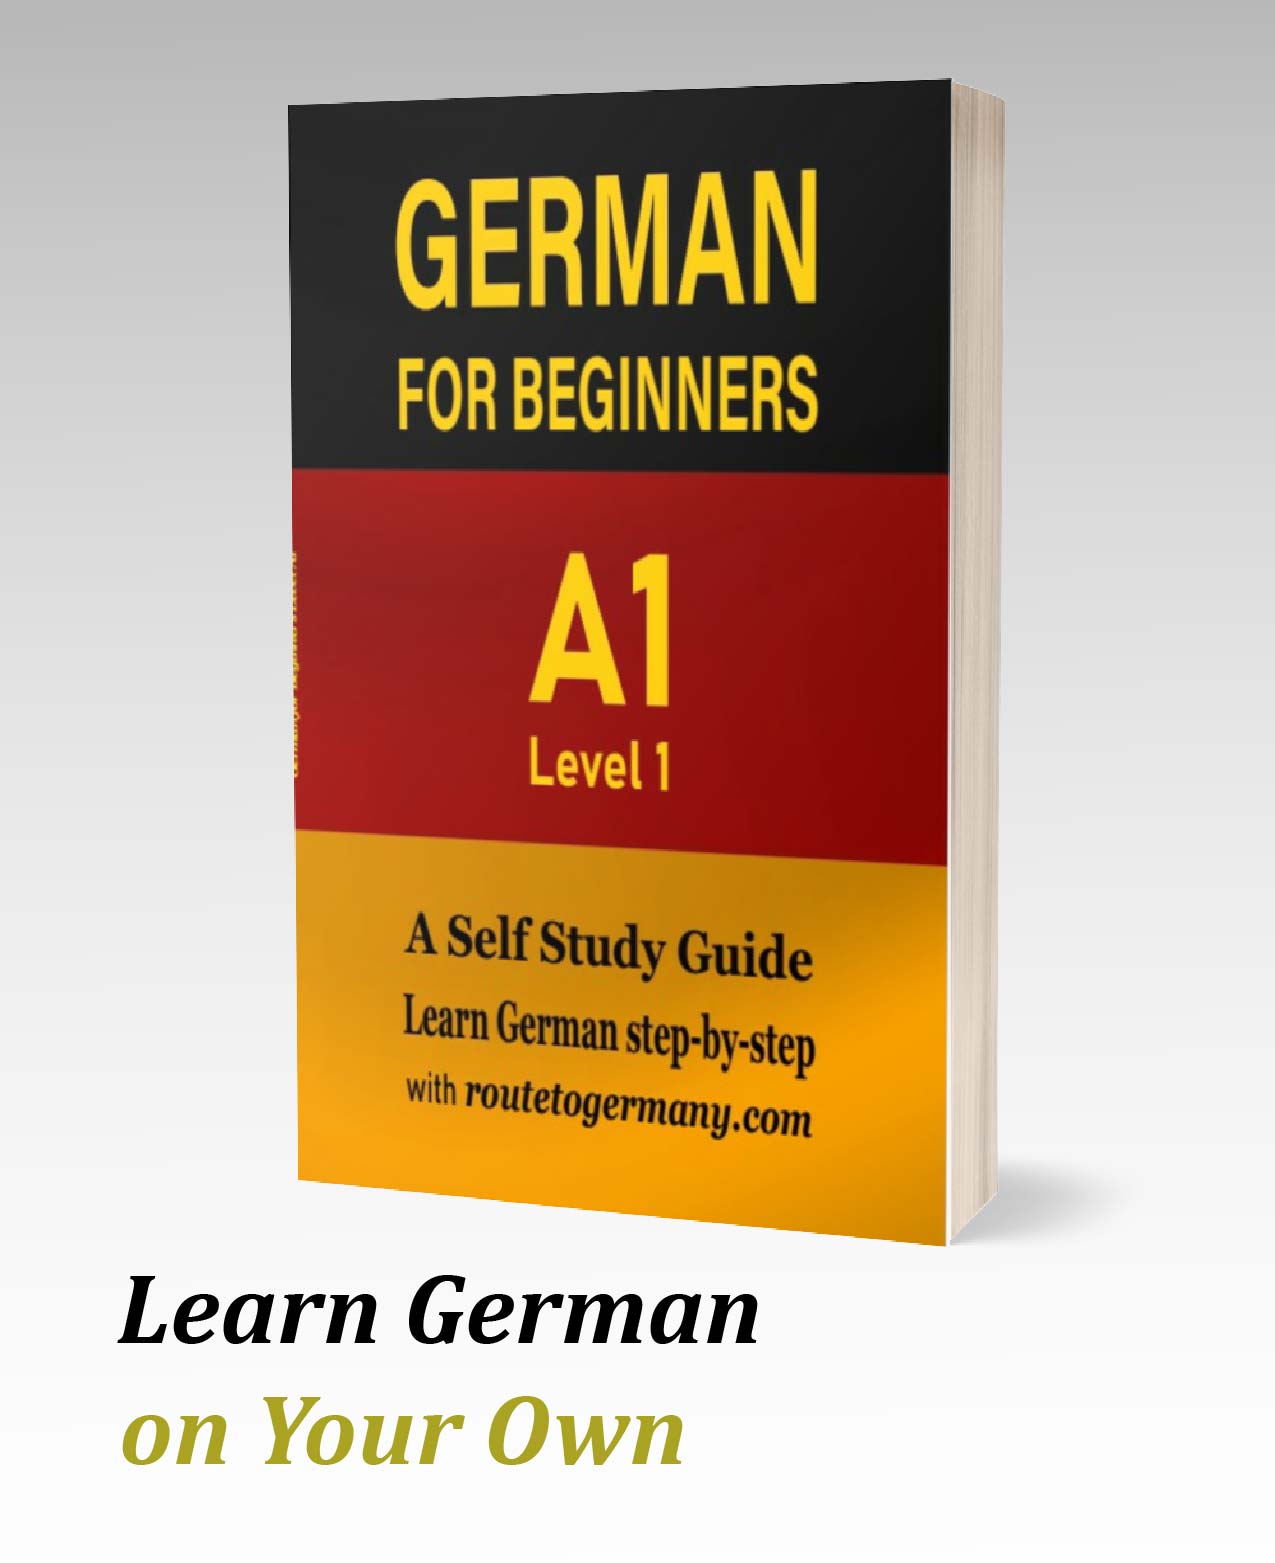 Learning German Language for Beginners